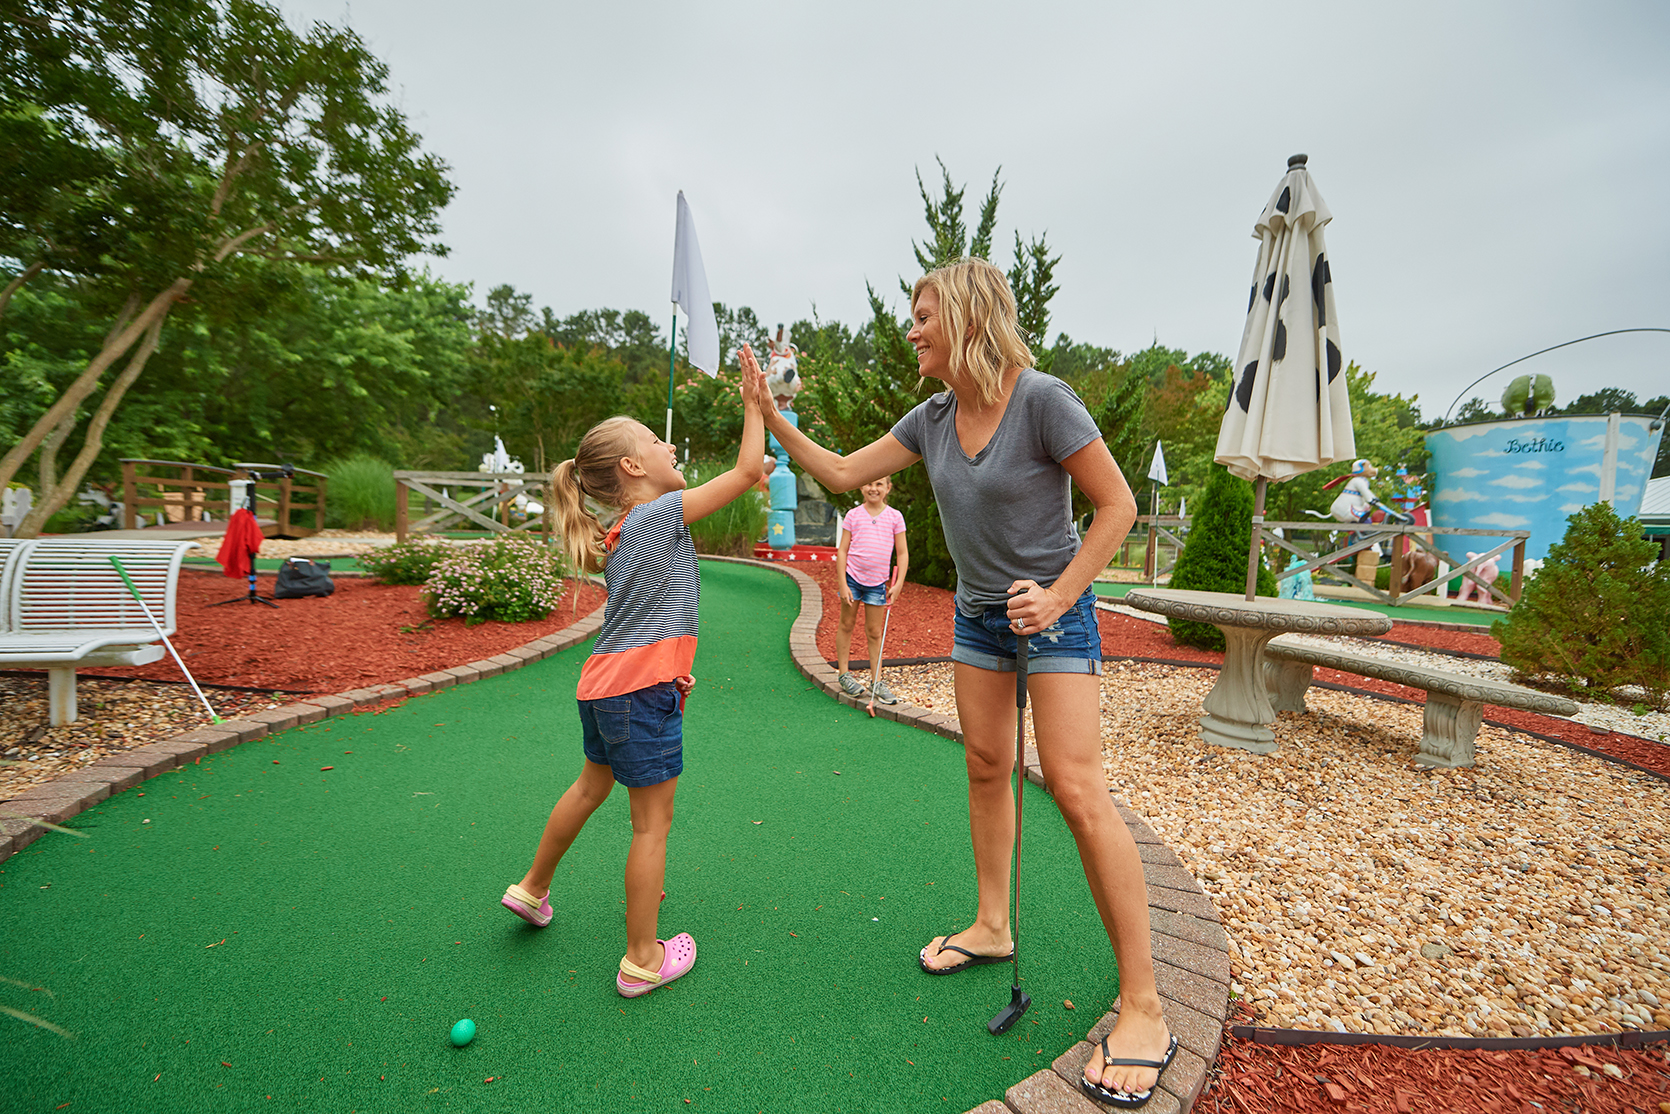 Woman and young girl high five in miniature golf course.